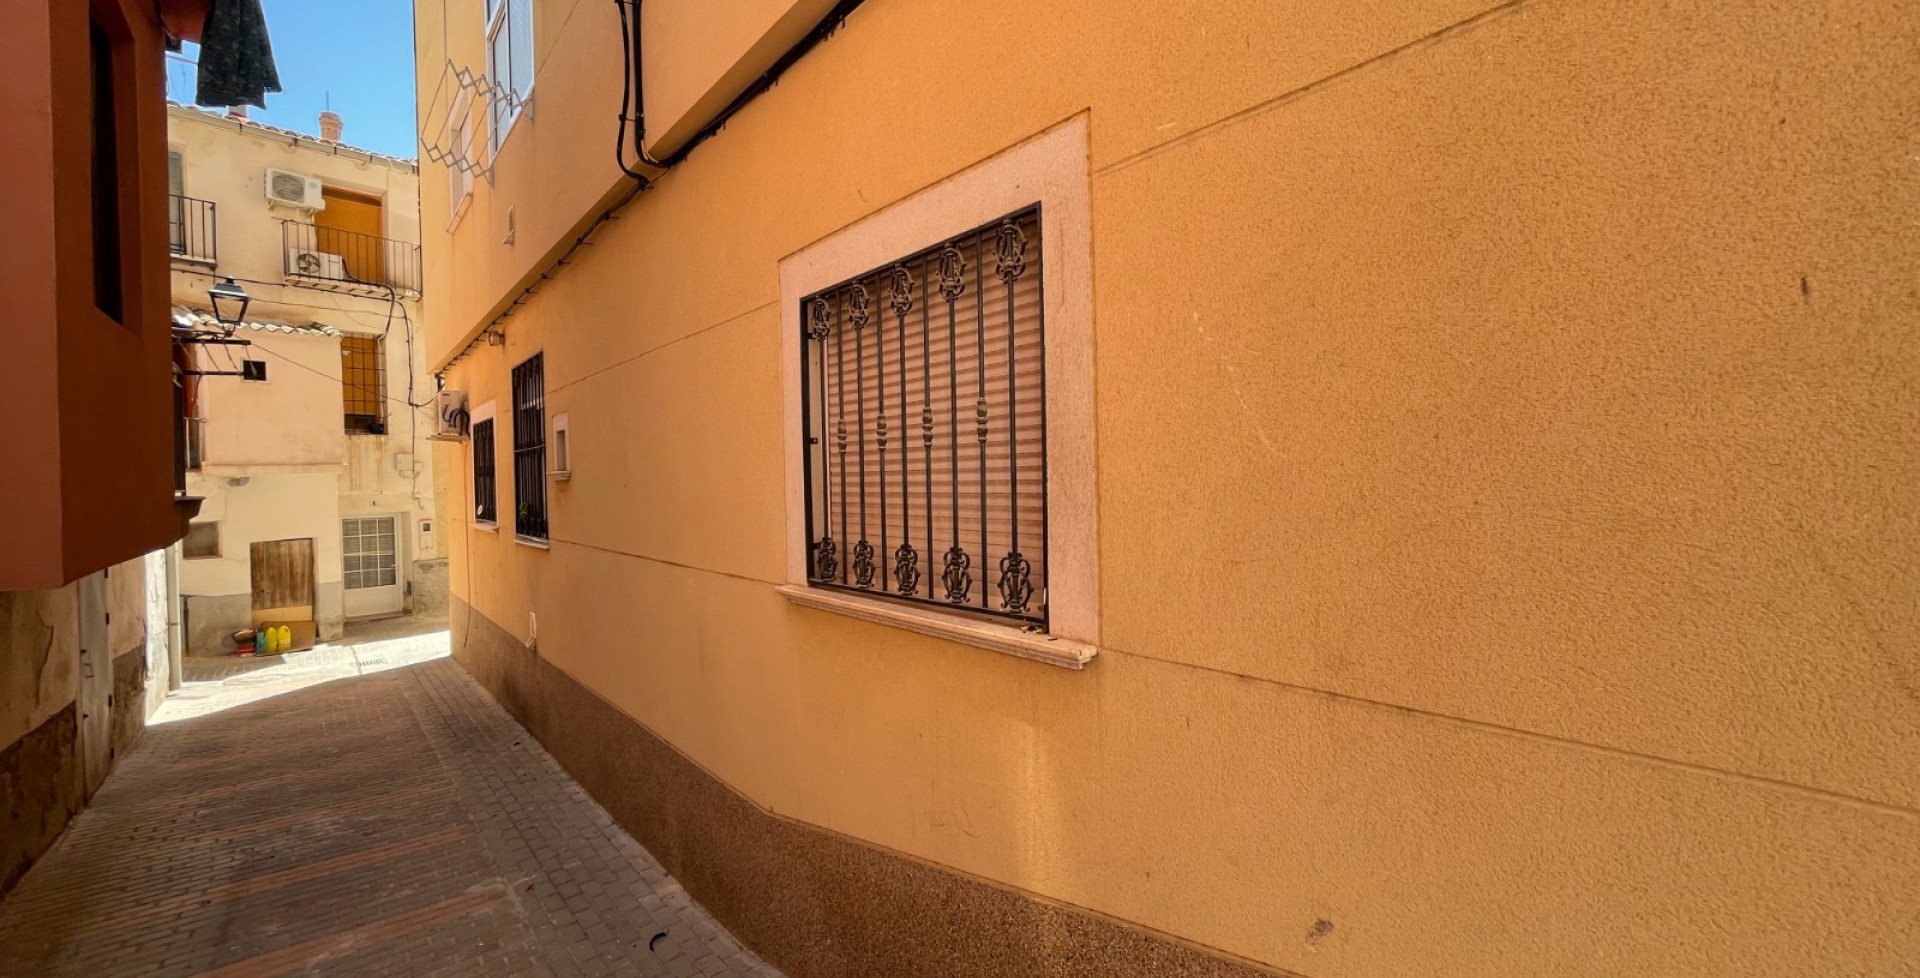 Big town house with 3 bedrooms set in town centre, Blanca, Murcia, Spain